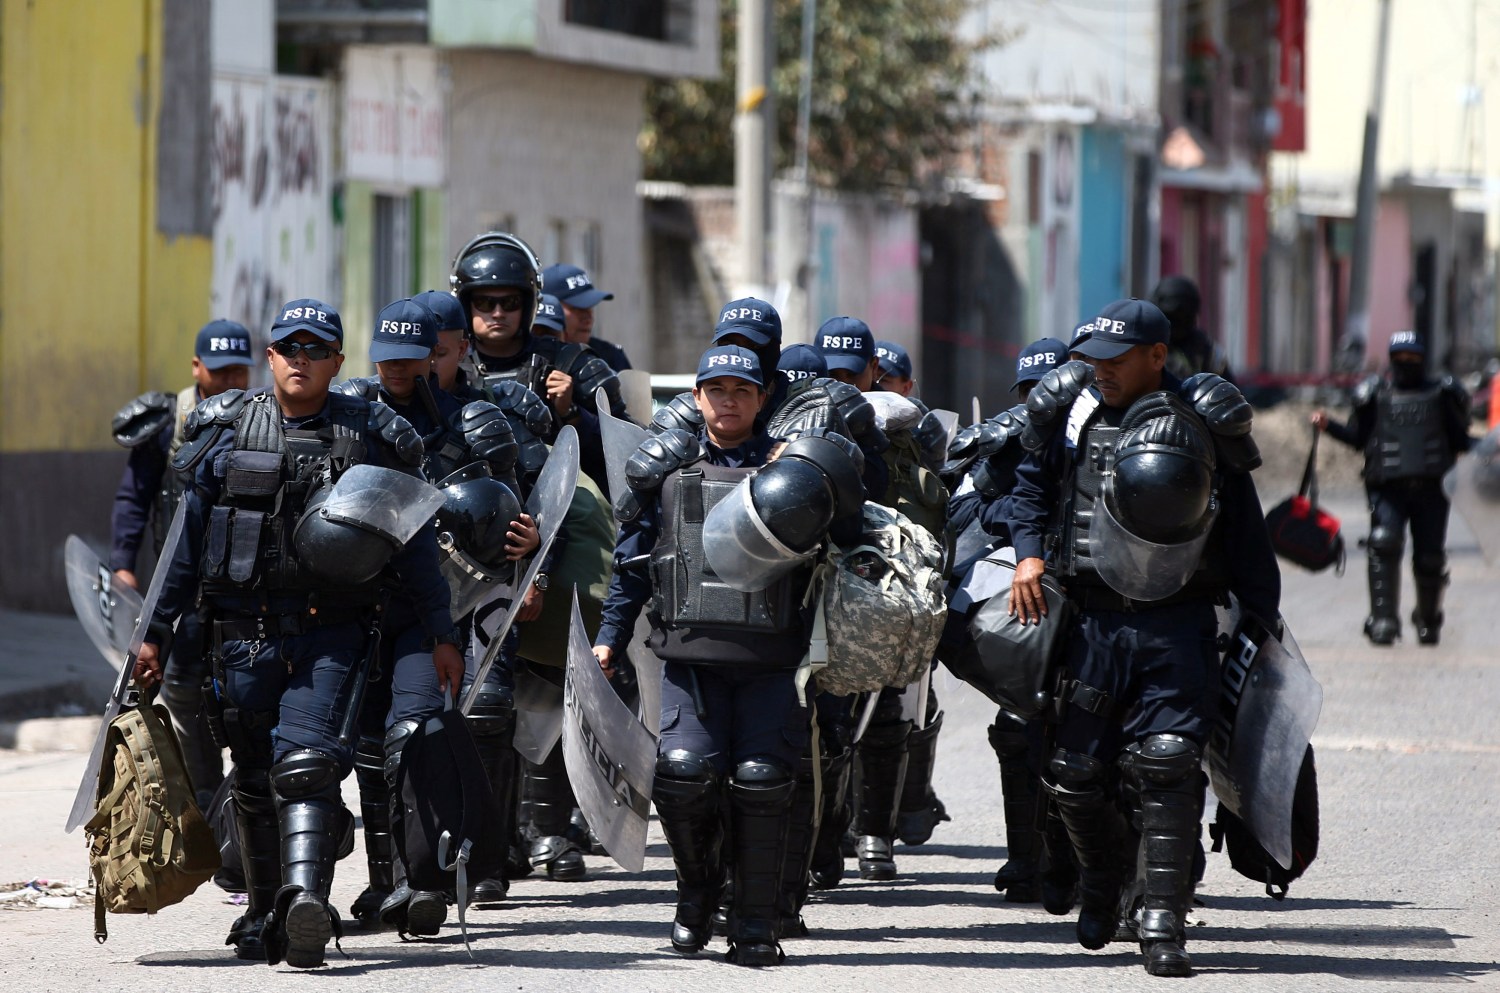 DATE IMPORTED: March 06, 2019 Police officers patrol a street after a blockade set by members of the Santa Rosa de Lima Cartel to repel security forces during an anti-fuel theft operation in Santa Rosa de Lima, in Guanajuato state, Mexico, March 6, 2019. REUTERS/Edgard Garrido